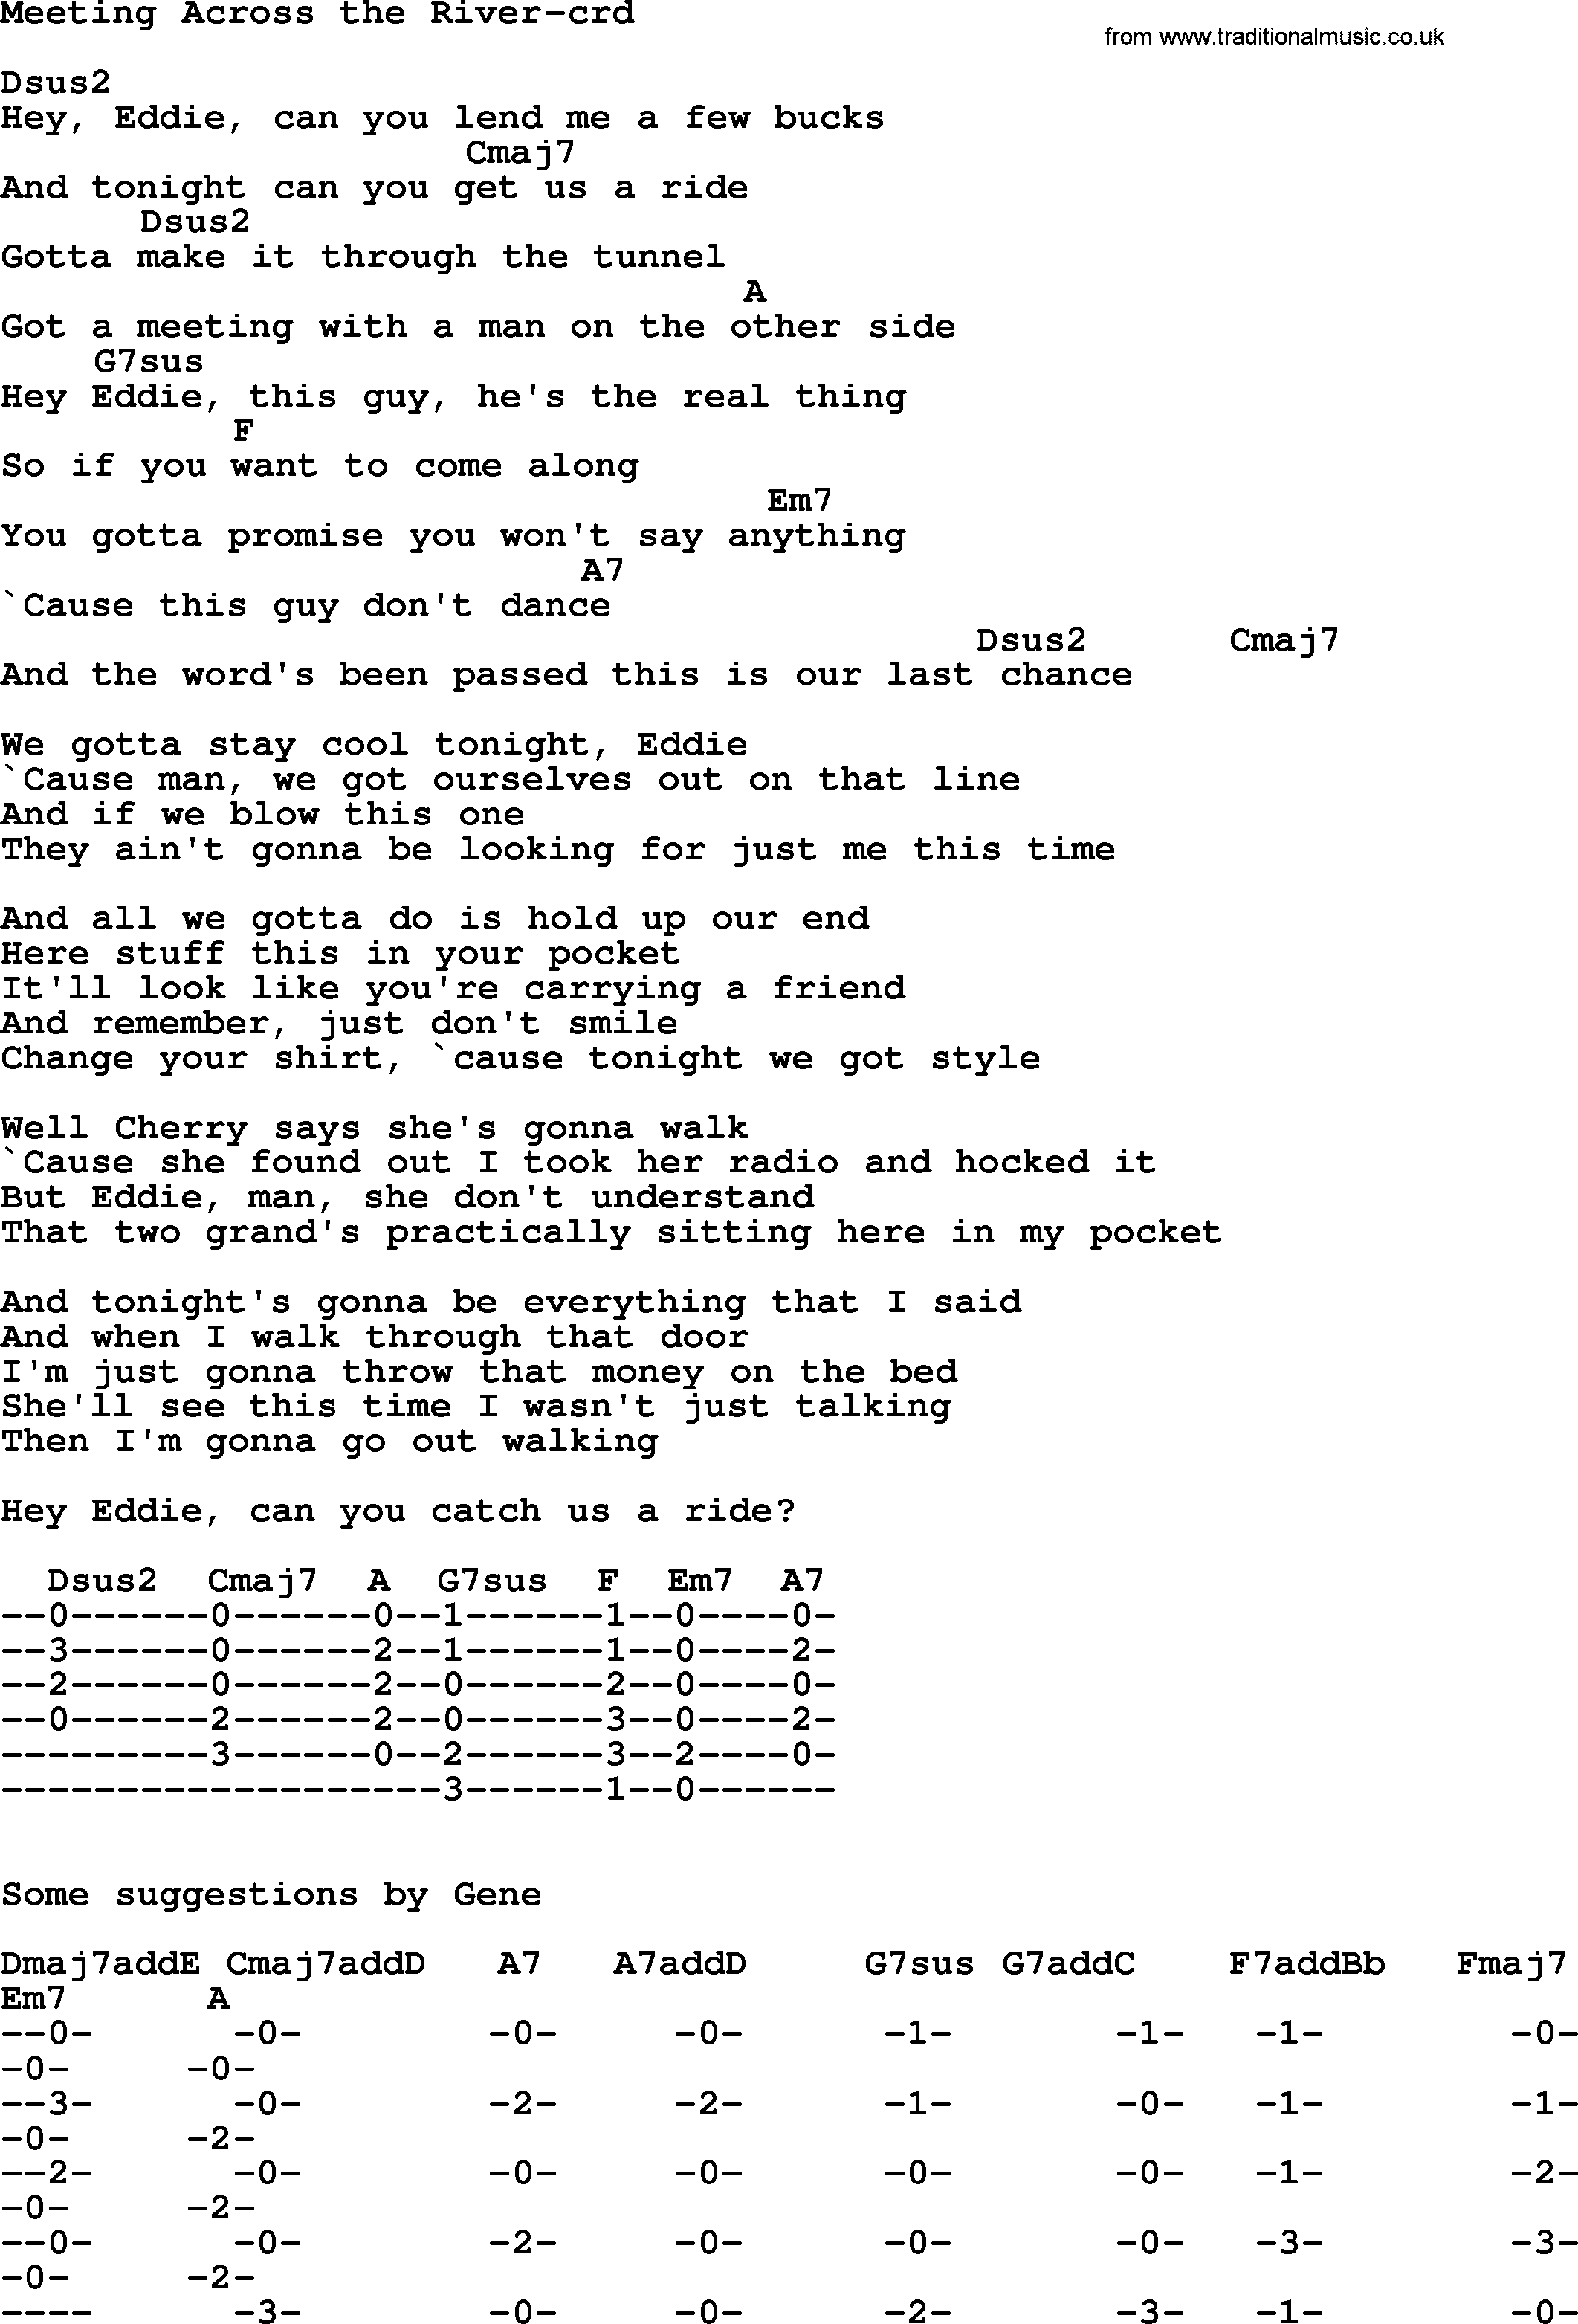 Bruce Springsteen song: Meeting Across The River, lyrics and chords